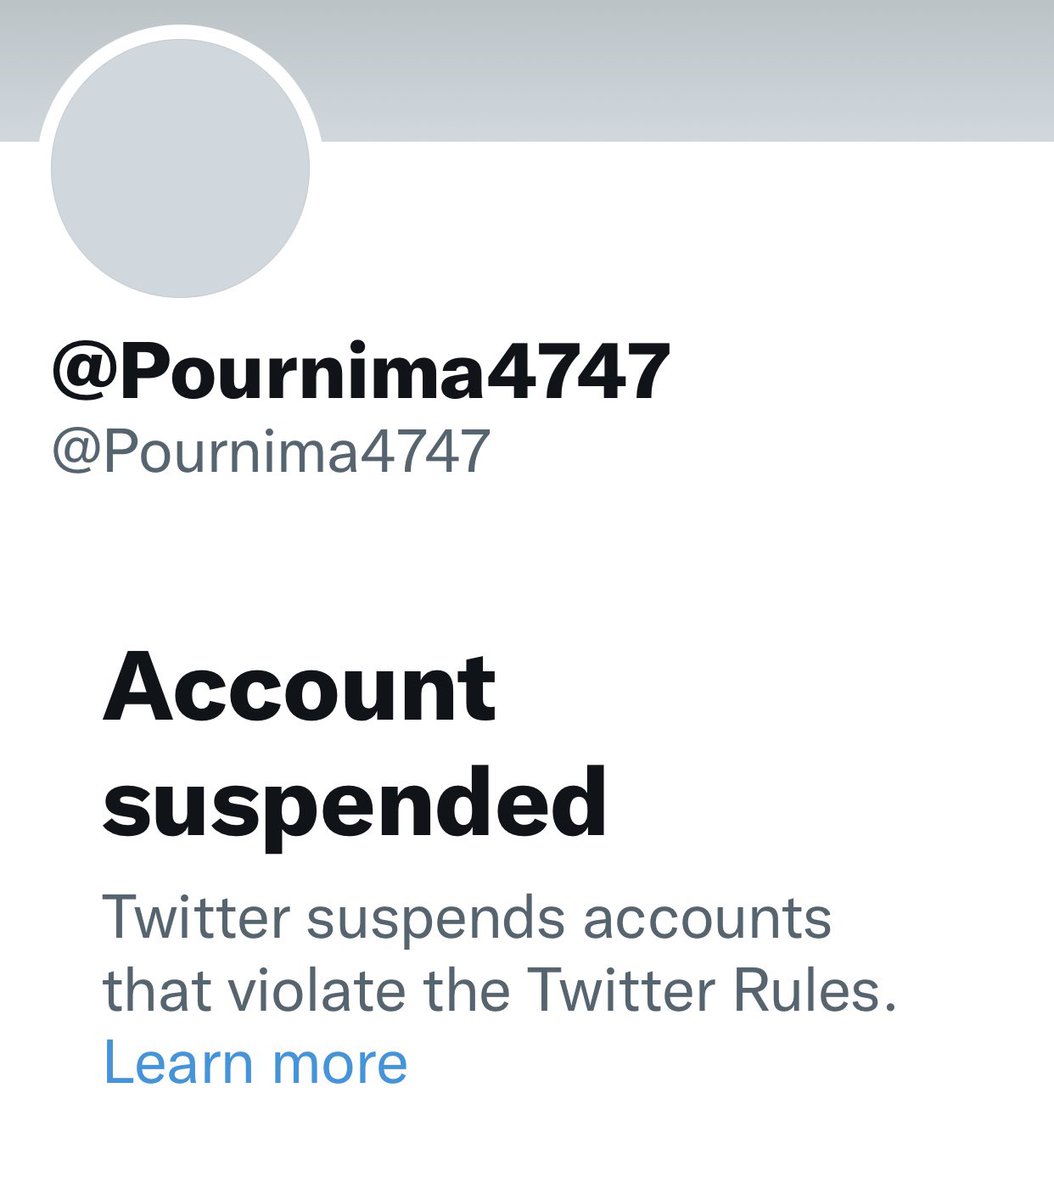 @RRS_InnerVoice @elonmusk @elonmusk Sir 

@Pournima4747 She have never violated any Twitter rules so our request to unsuspend her account 

Politics Hindering SSRCase